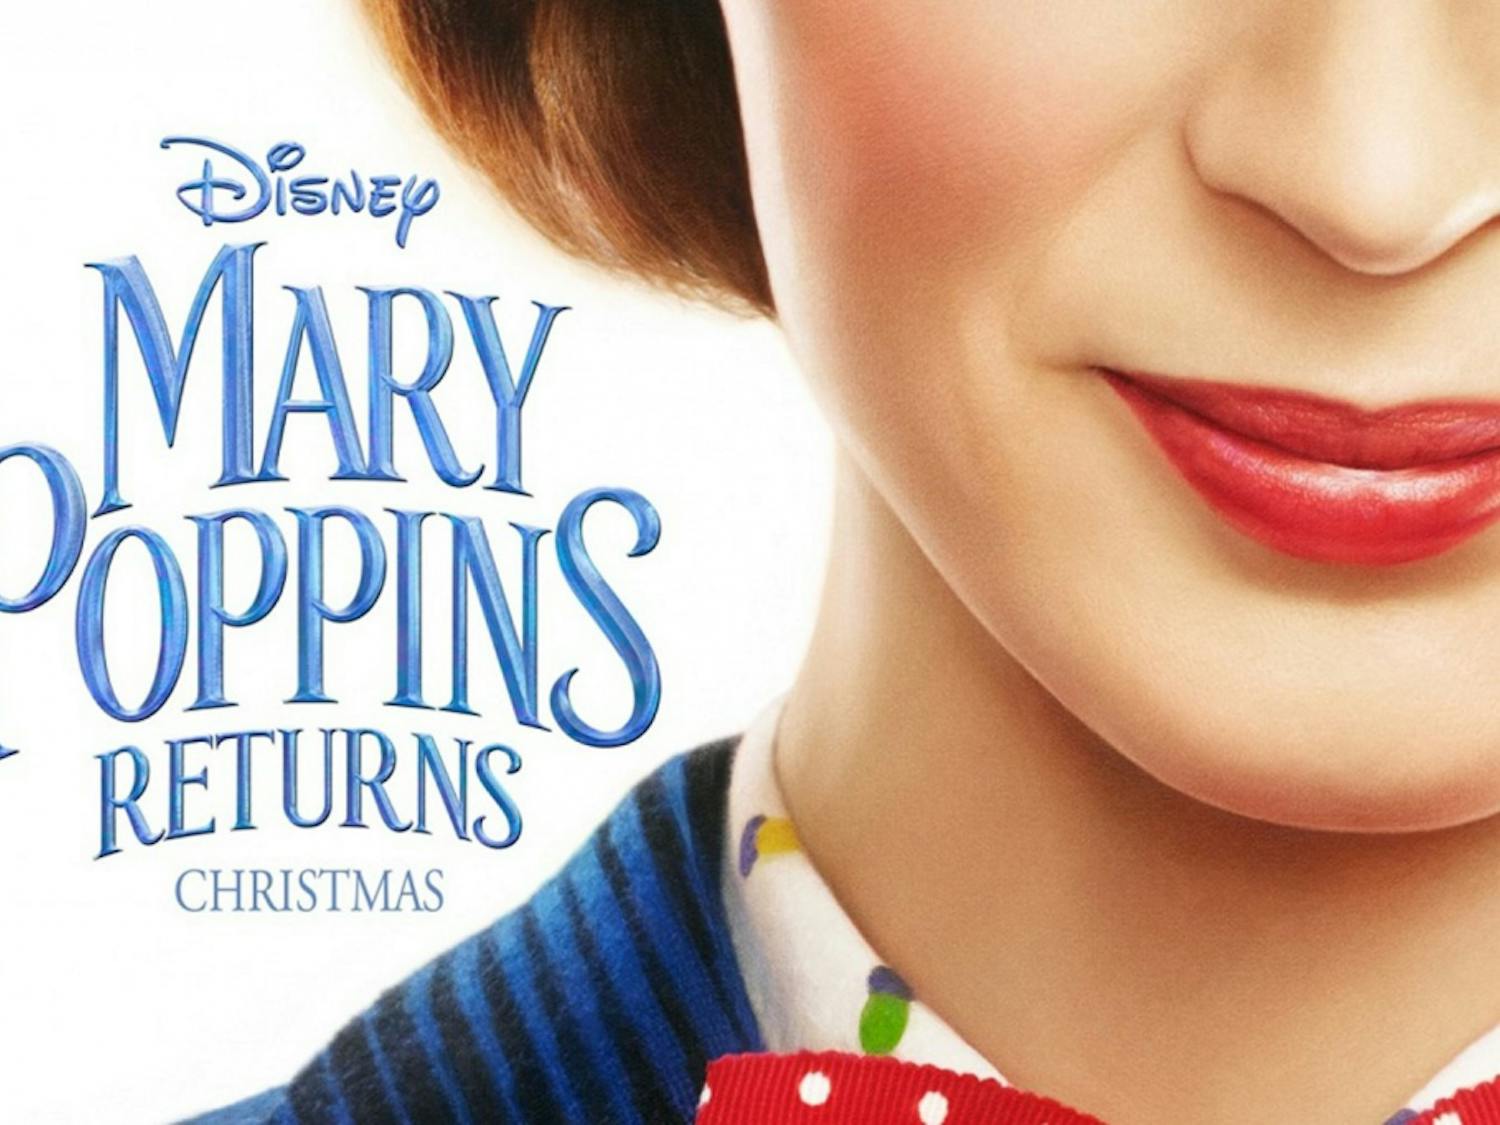 The new film “Mary Poppins Returns” looks into the classic story of the magical nanny returning to the Banks family to help them learn the value of family.&nbsp;